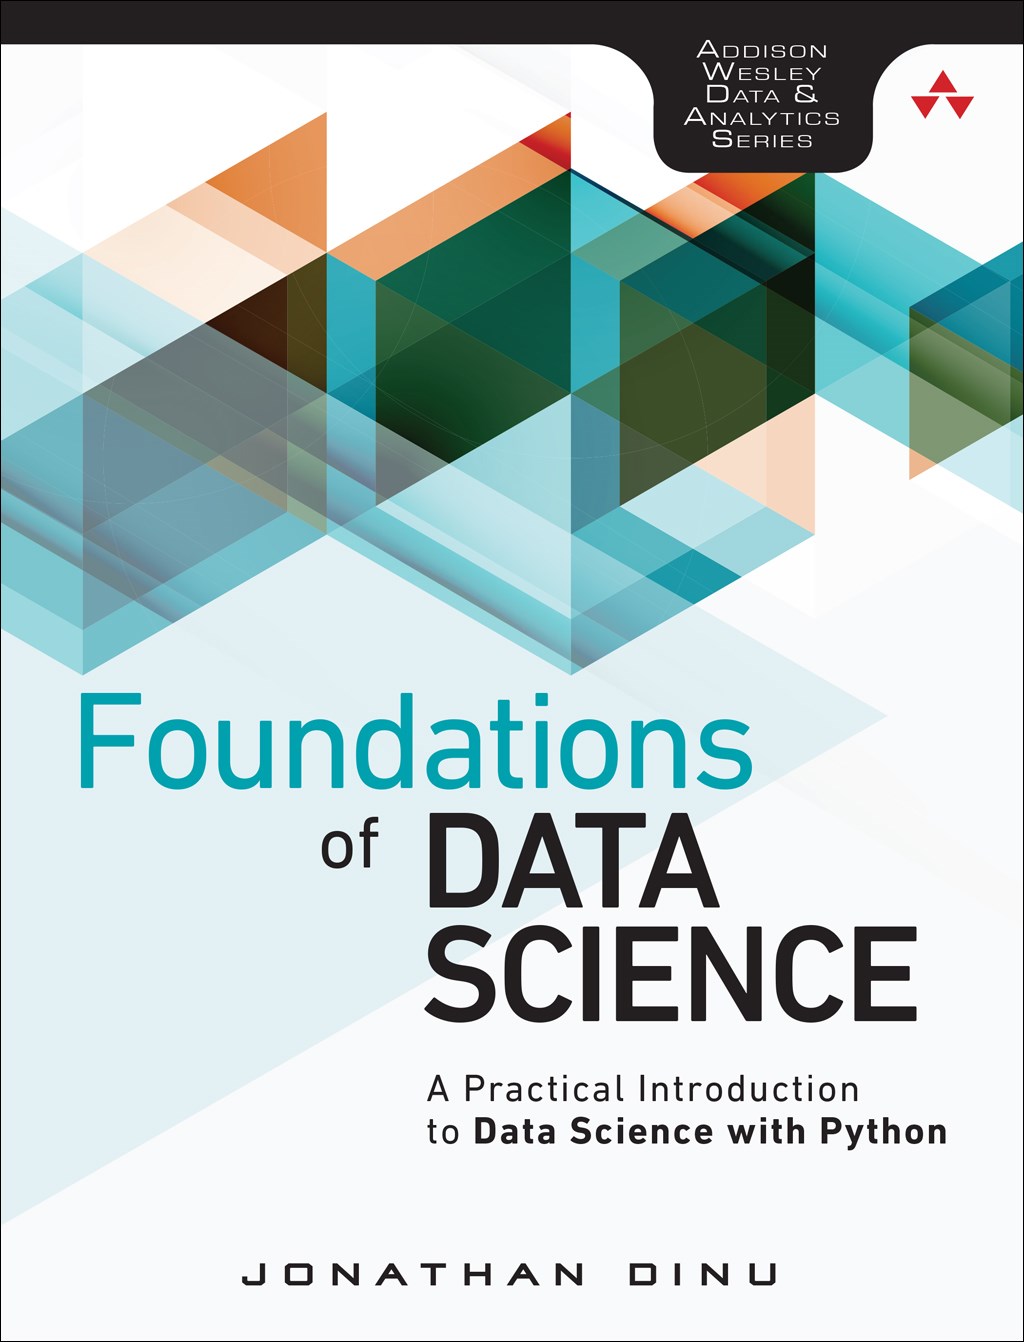 Foundations of Data Science: A Practical Introduction to Data Science with Python